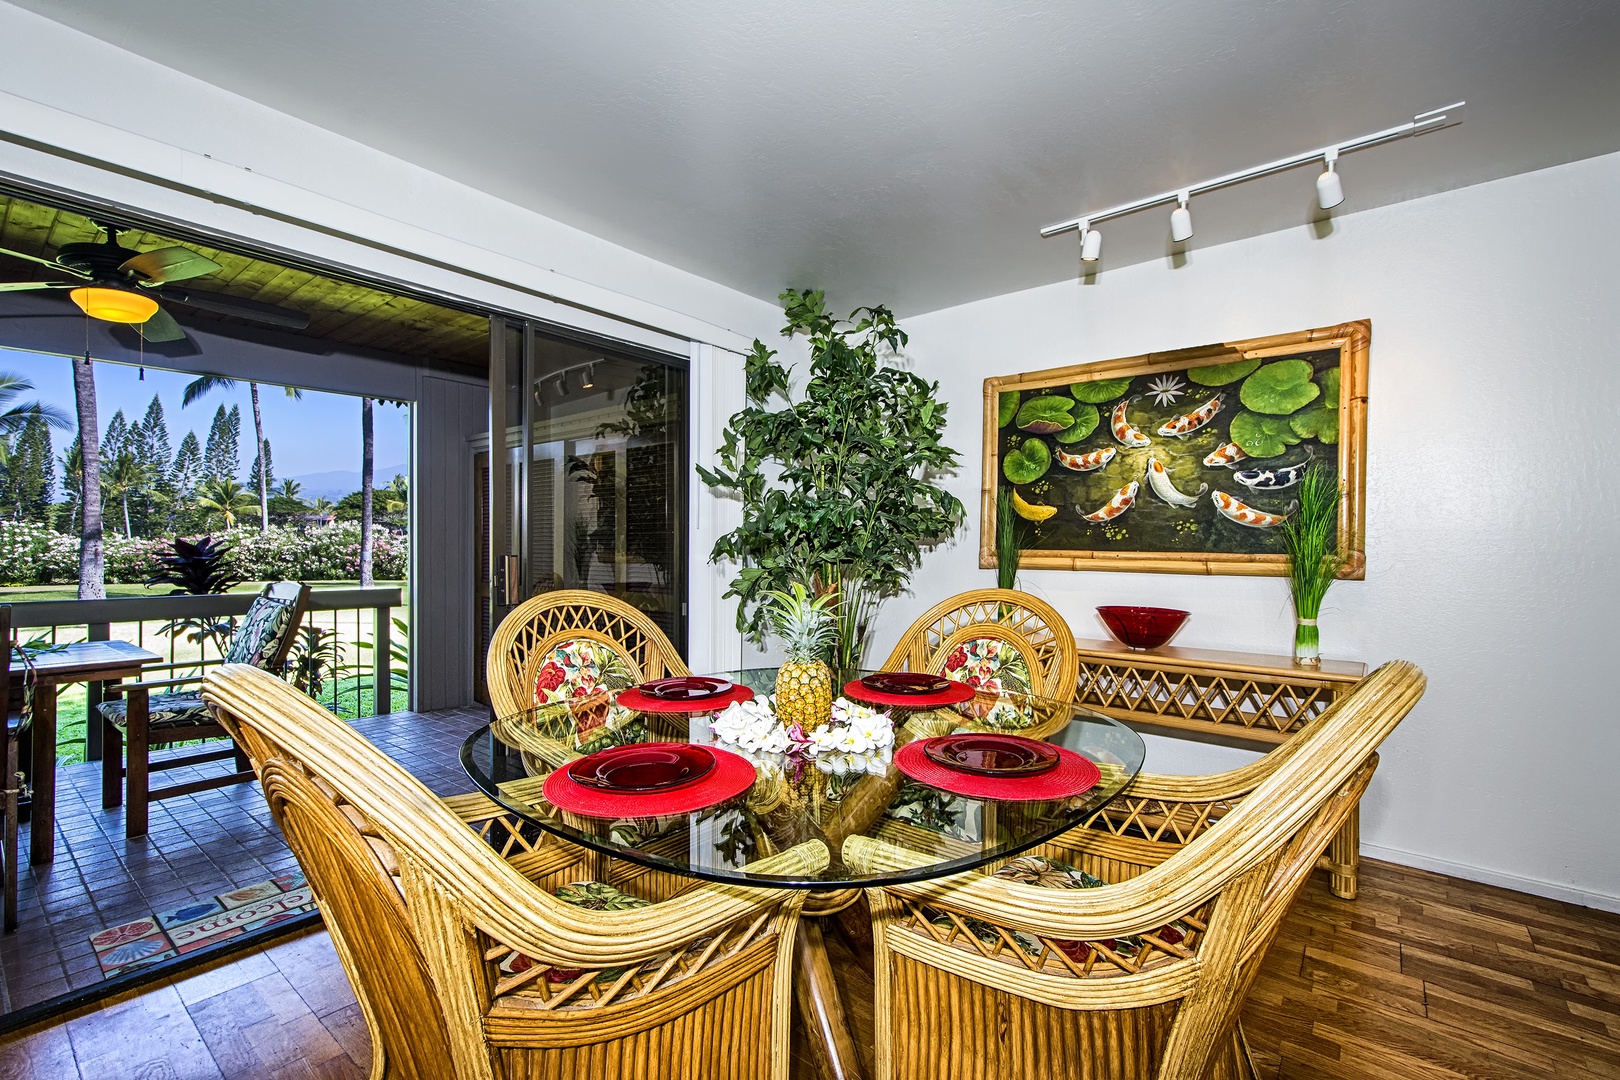 Kailua Kona Vacation Rentals, Kanaloa at Kona 701 - Beautifully furnished in a tropical theme with air conditioning throughout